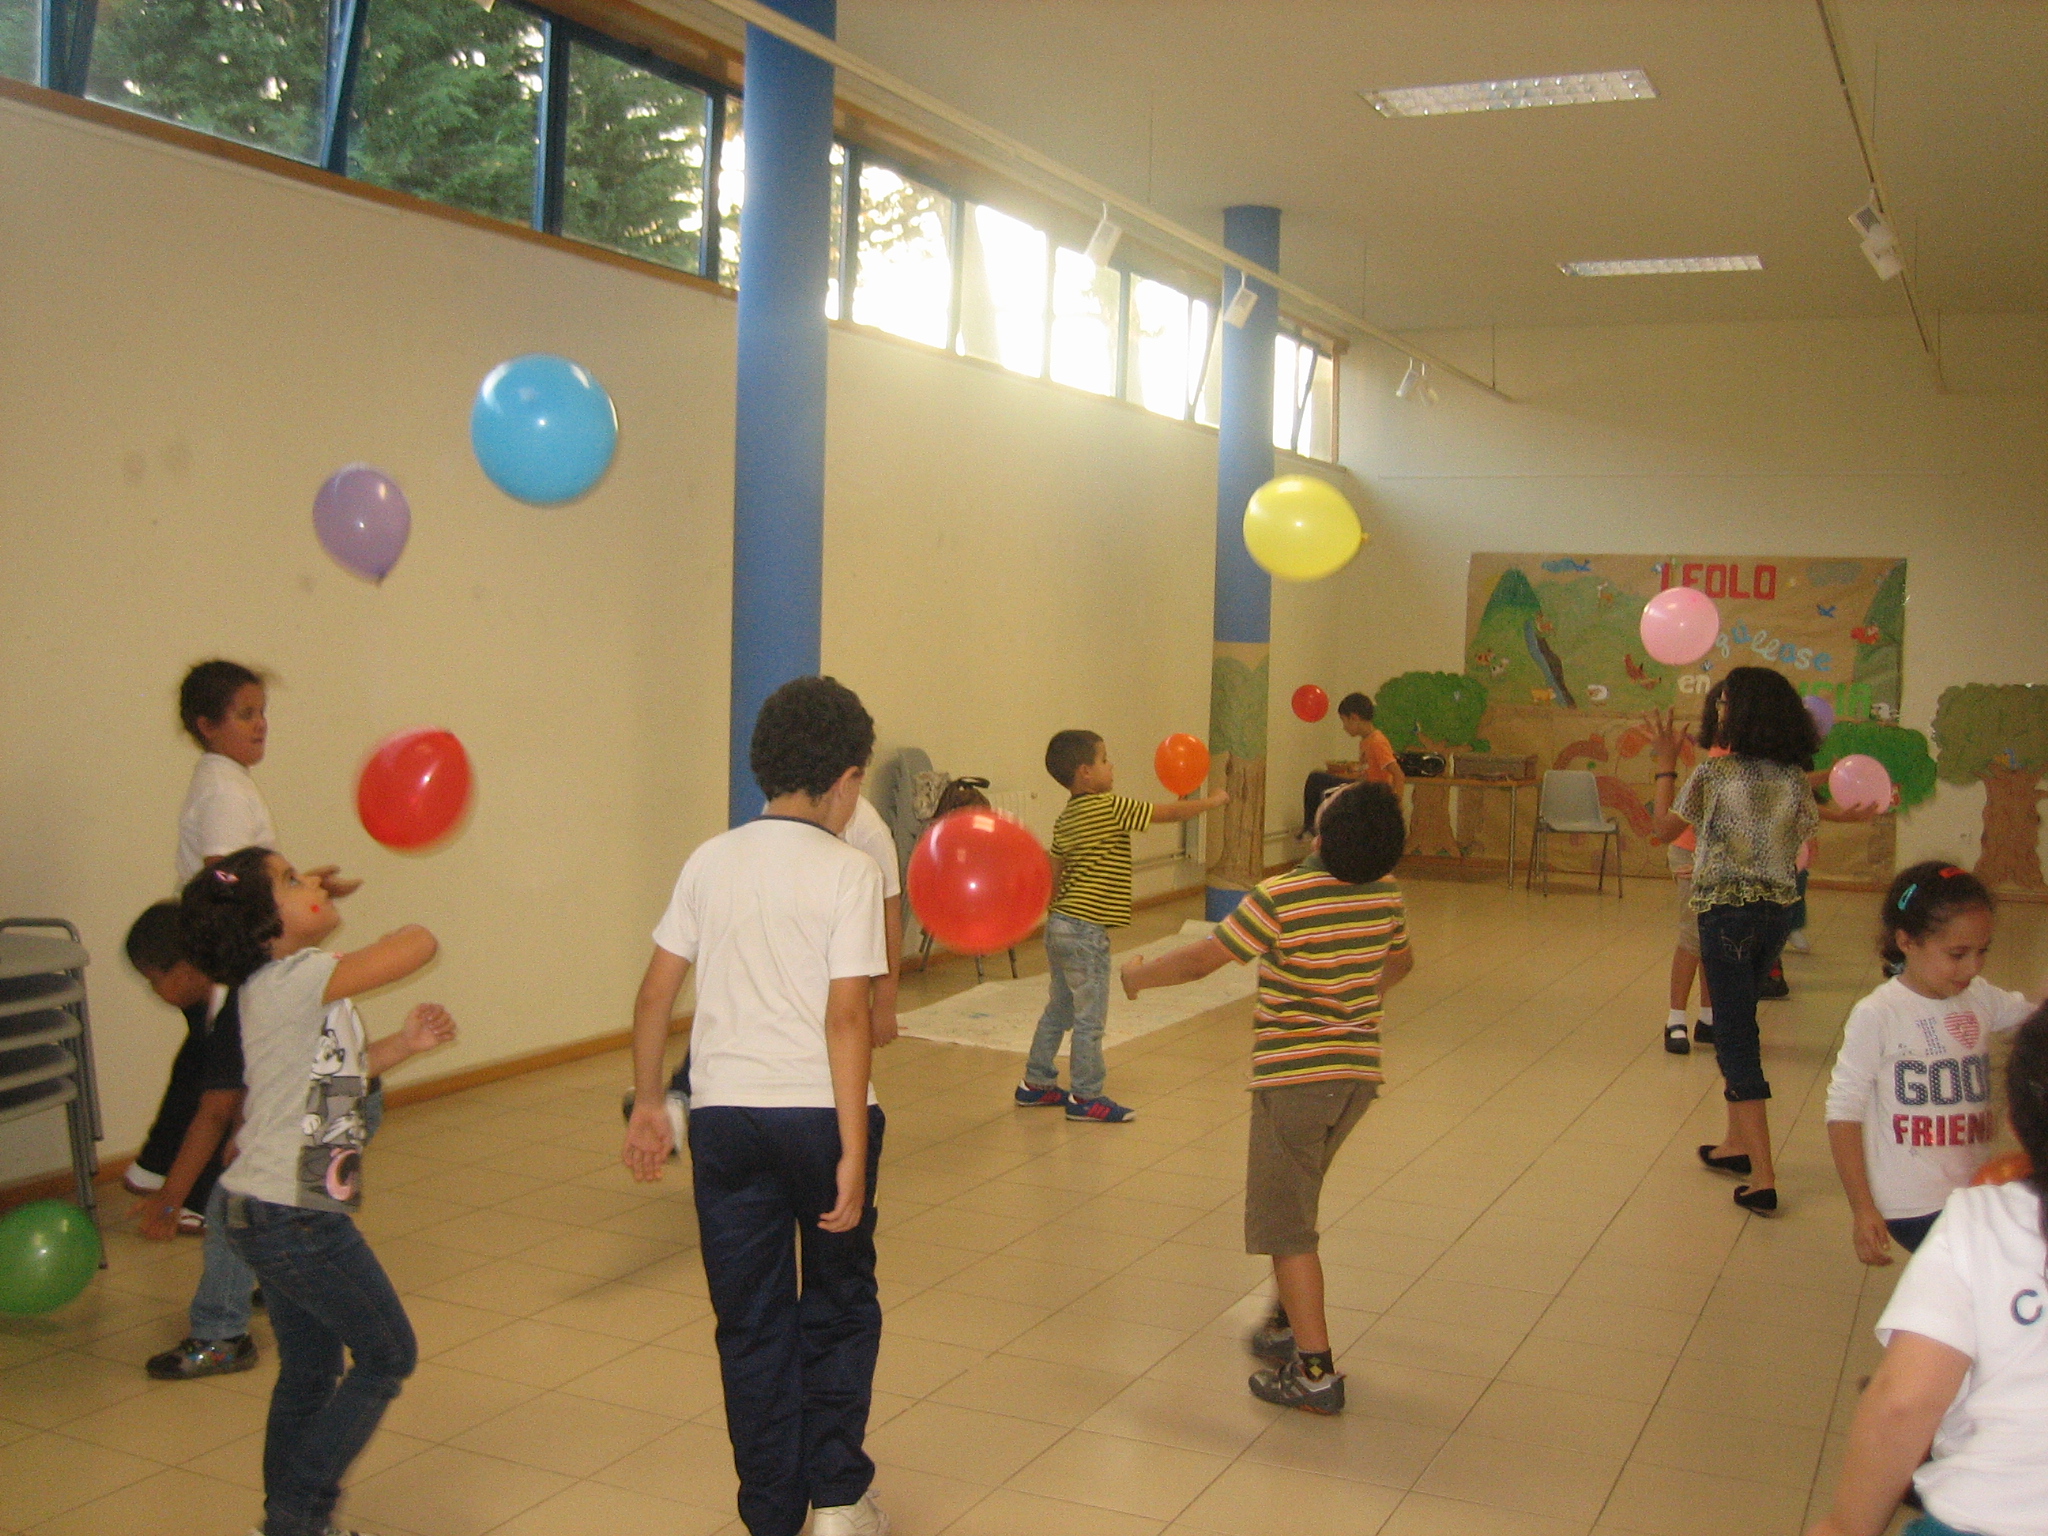 a group of s holding up balloons in a room